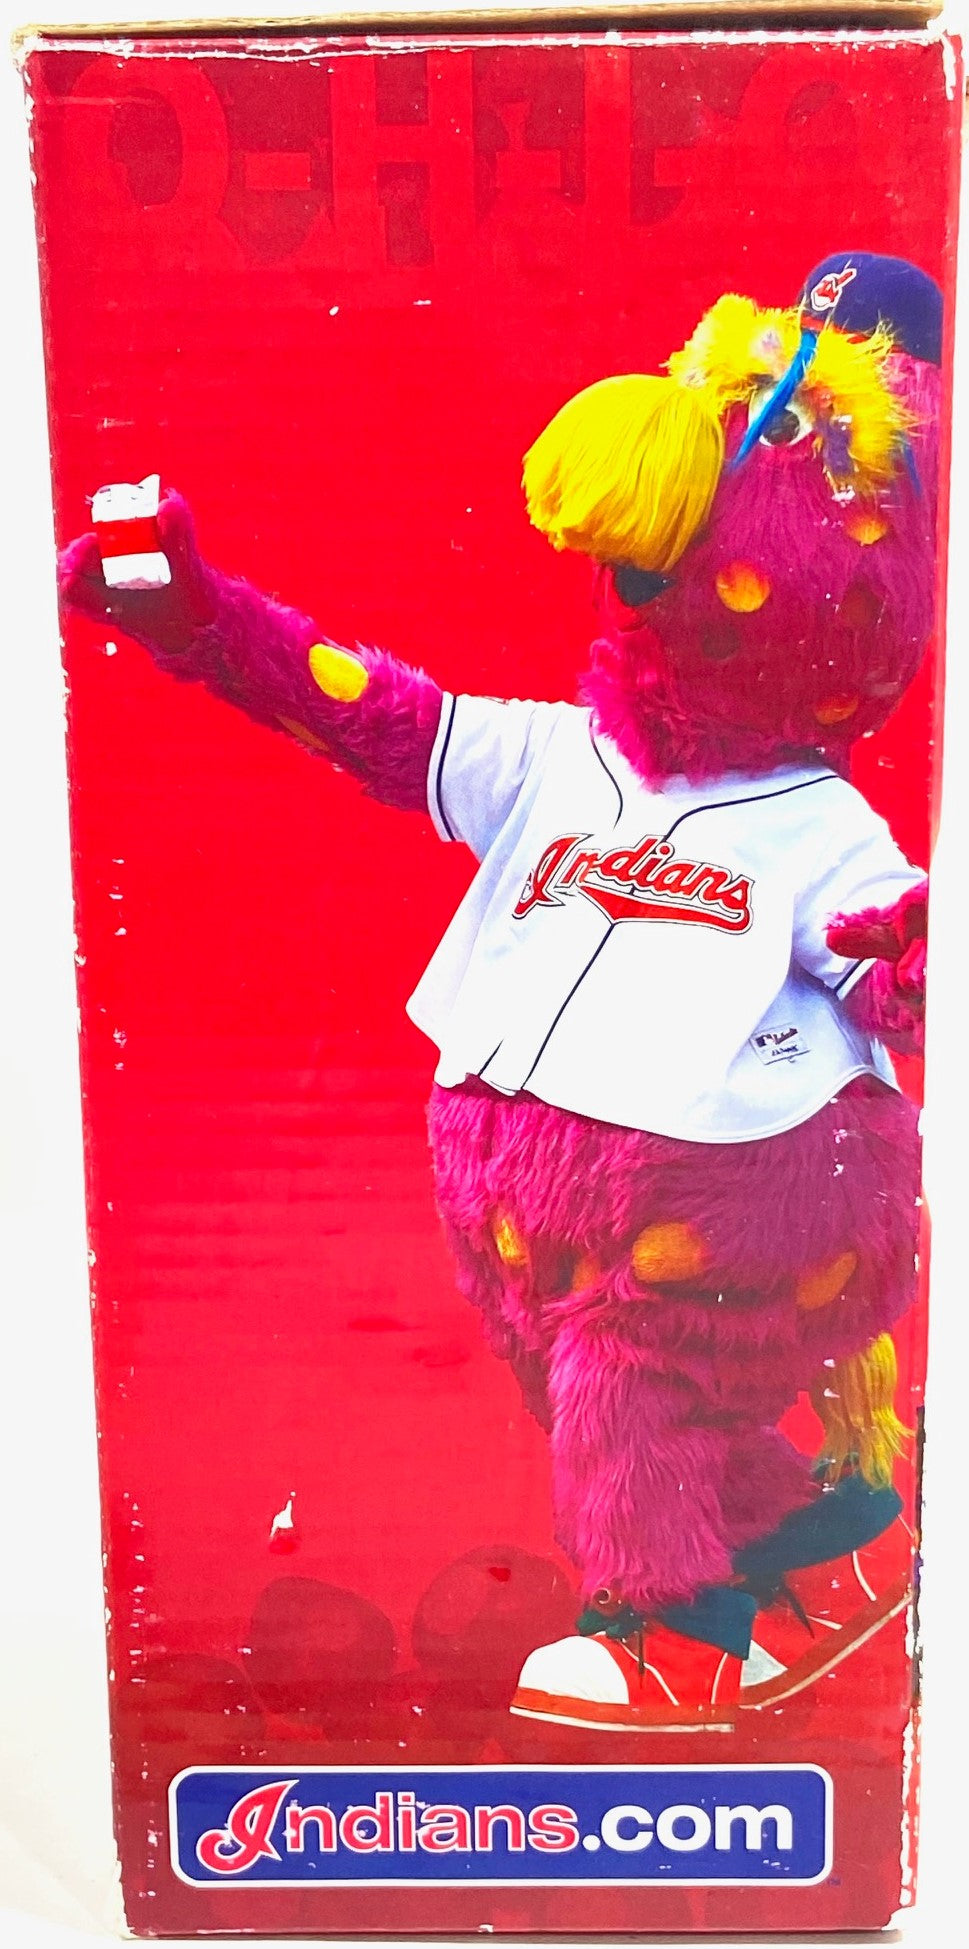 Slider Mascot 2010 MLB Cleveland Indians Time-Warner Mini-Bobblehead Used by BD&A